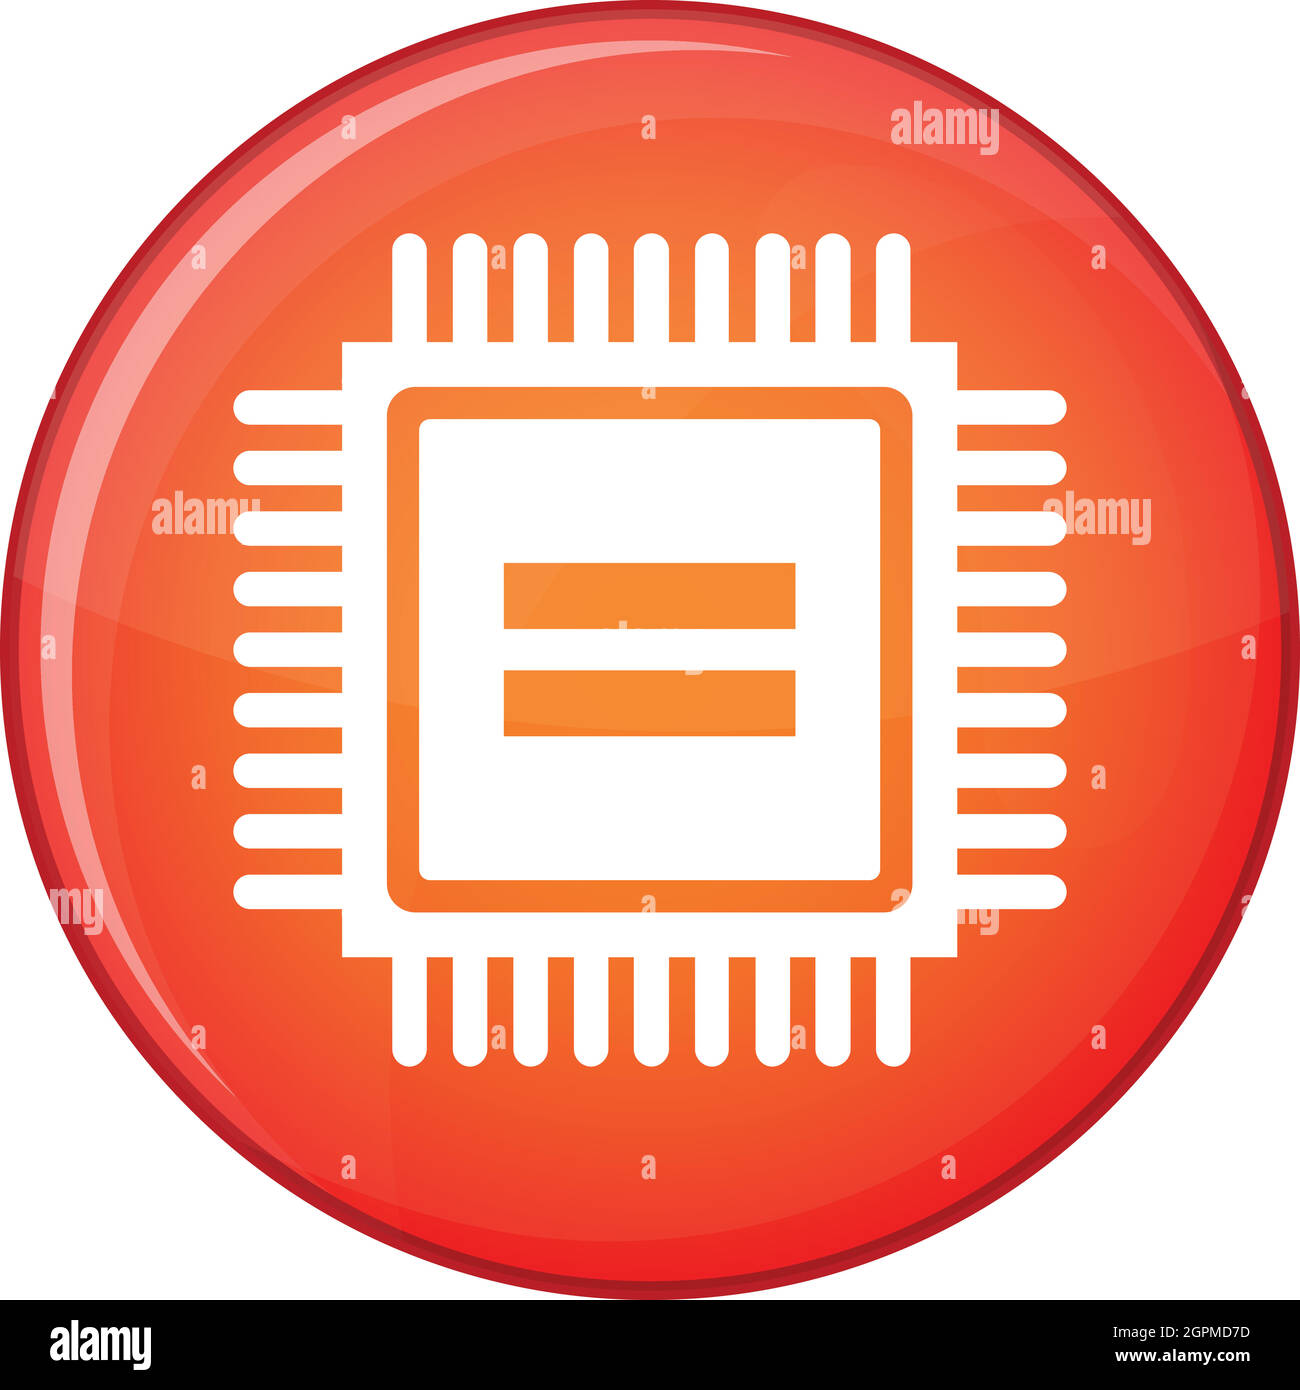 Electronic circuit board icon, flat style Stock Vector